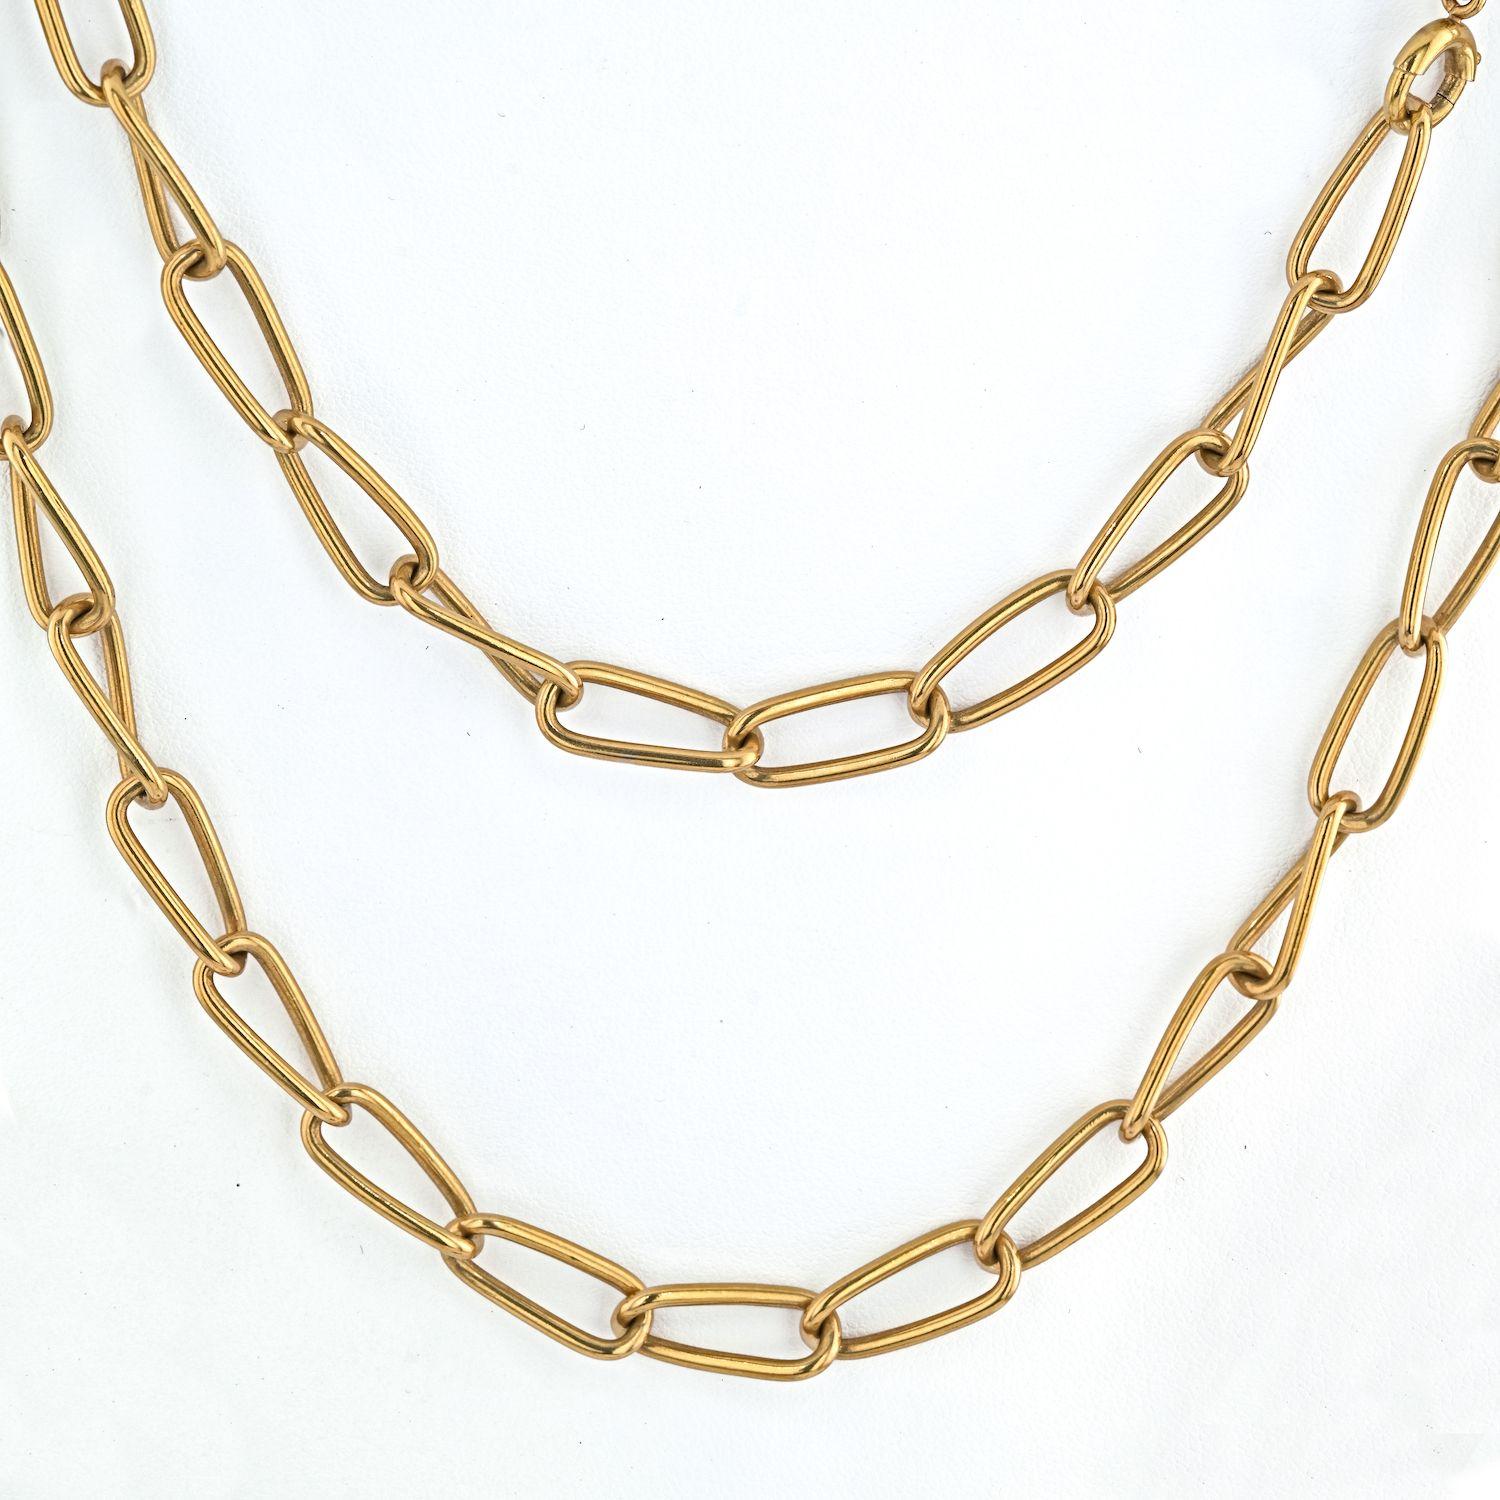 Rare Bvlgari 18K Yellow Gold 1970's Long Link Chain Necklace for versatile unisex wear.
Crafted as two chains and can be worn long way and as two shorter ways. 
First chain: 30 inches;
Second chain: 27.5 inches. 
Combined 57.5 inches. 
